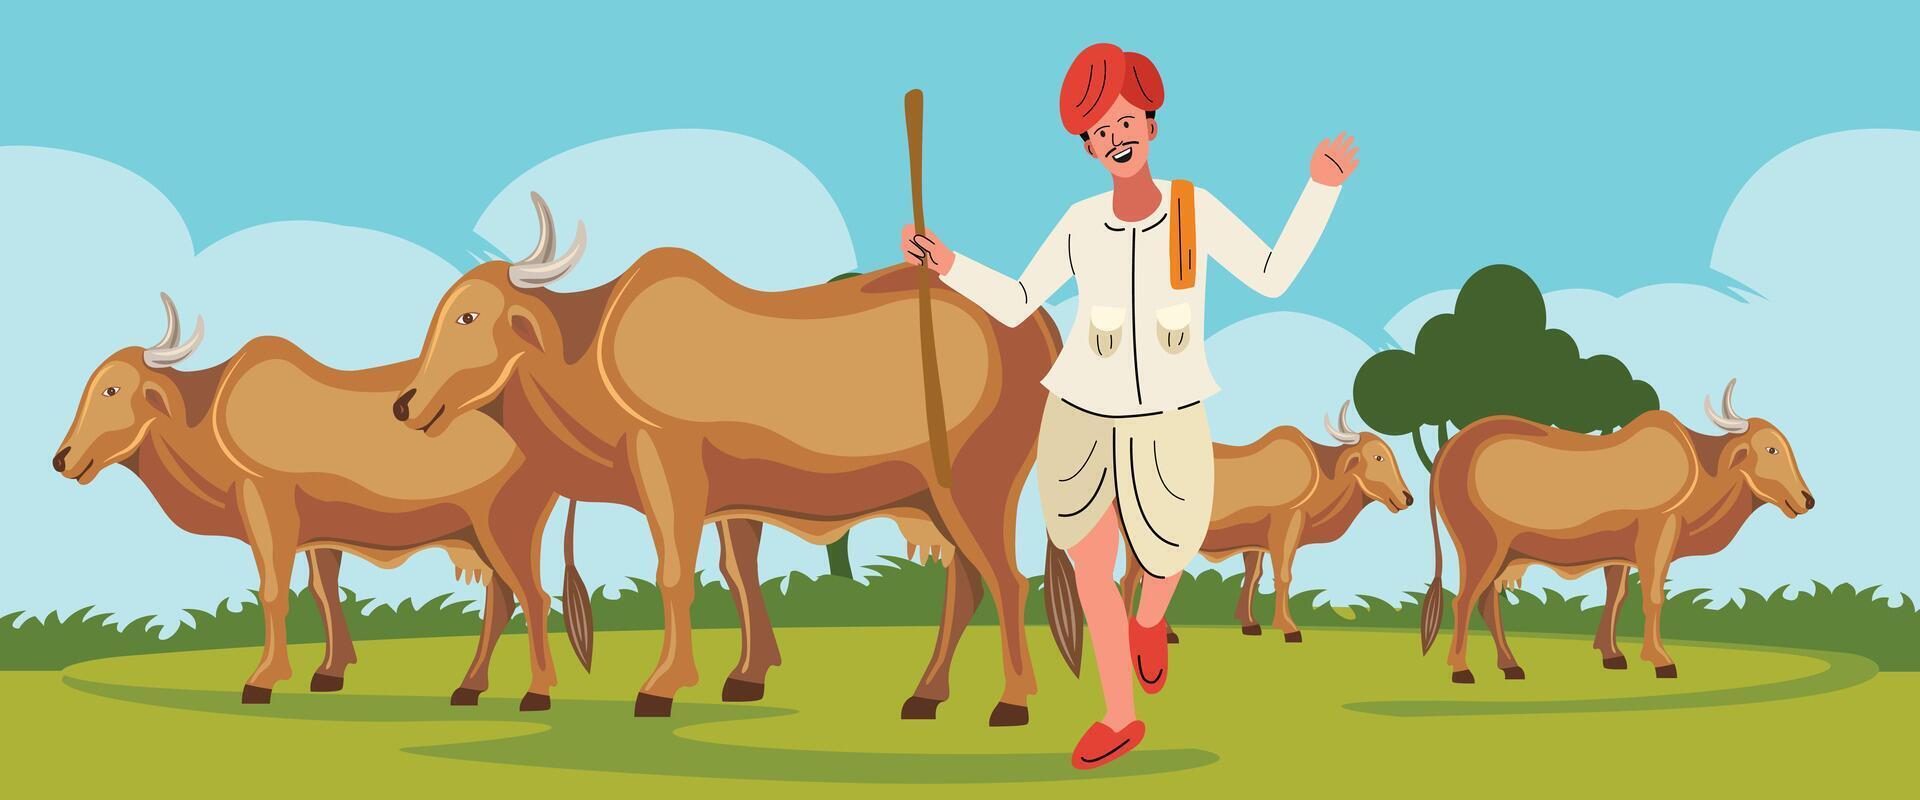 rabari man with the herd of cows, cattles in traditional dress vector